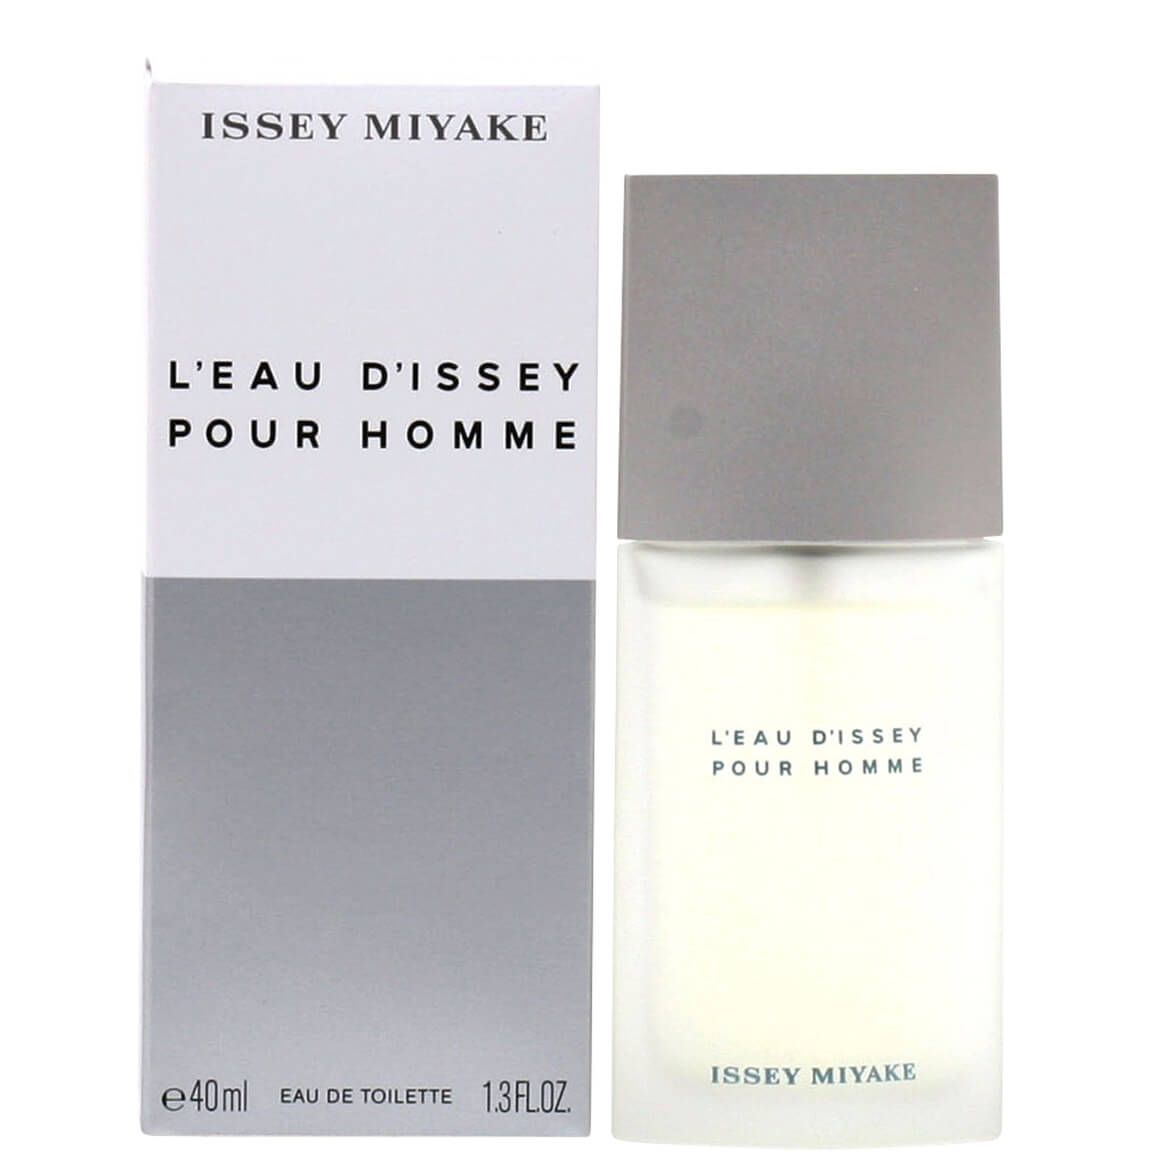 L'eau d'issey Pour Homme by Issey Miyake for Men EDT, 1.3 oz.. + '-' + 373163